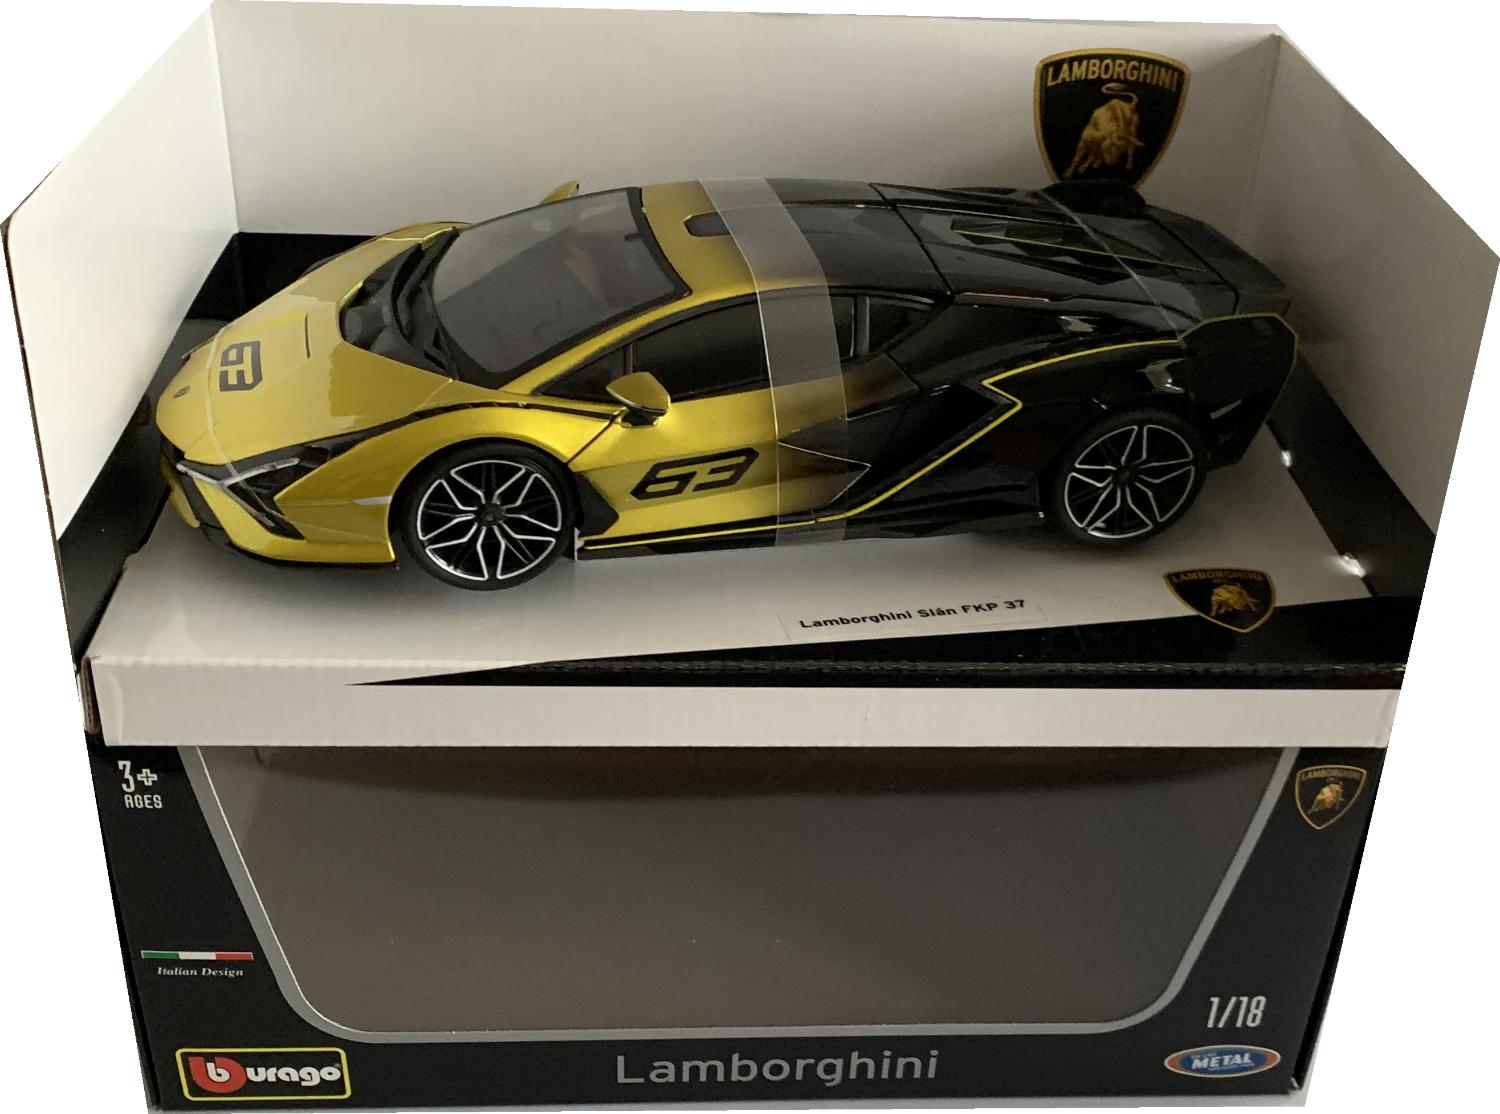 An excellent scale model of the Lamborghini Sian FKP 37 with high level of detail throughout, all authentically recreated.  Model is presented in a window display box.    The car is approx. 27 cm long and the presentation box is 30 cm long